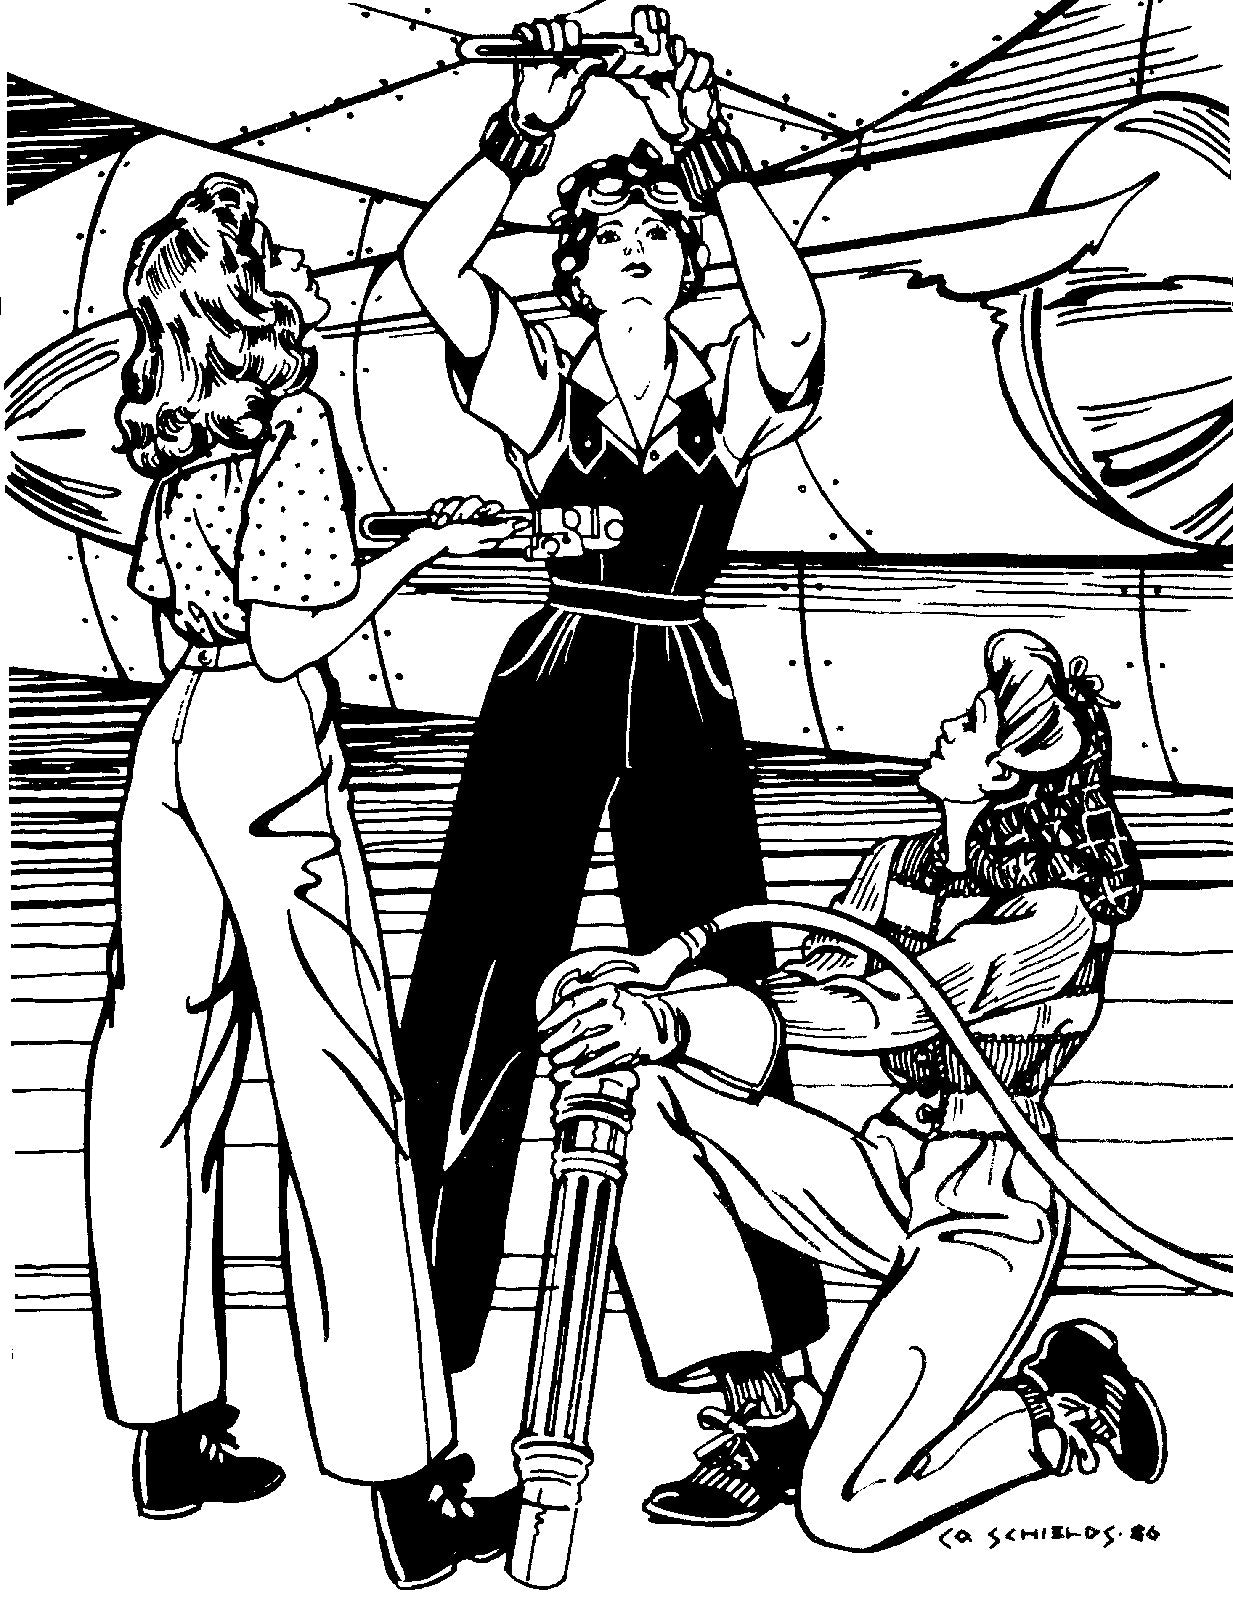 Black and white pen and ink drawing by artist Gretchen Shields. Three women wearing 240 Rosie the Riveter while fixing an airplane